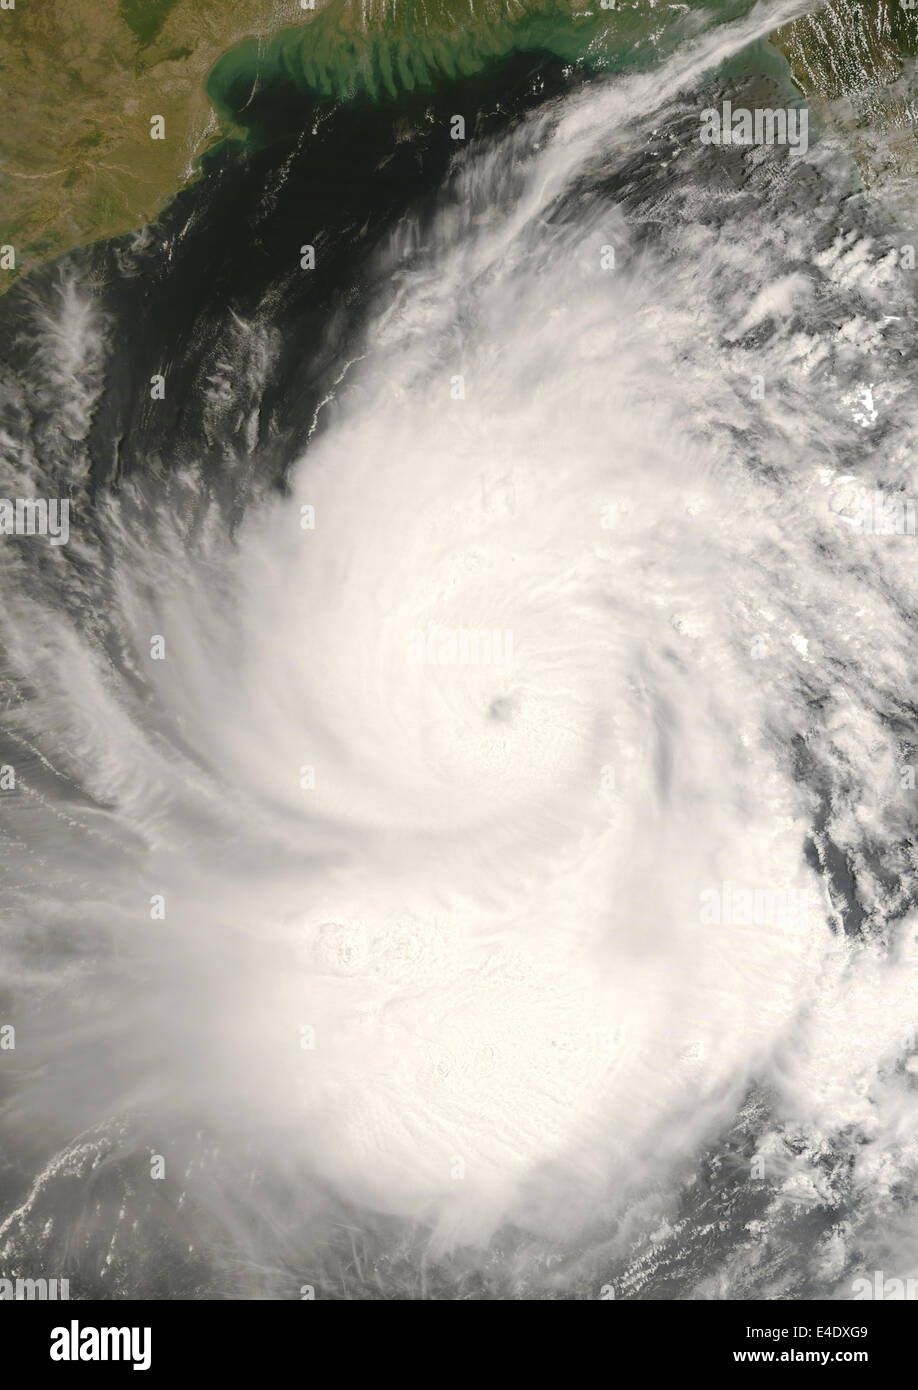 Cyclone Nargis, Myanmar, In 2008, True Colour Satellite Image. Tropical Cyclone Nargis on May 1st 2008 off the coast of Burma (M Stock Photo